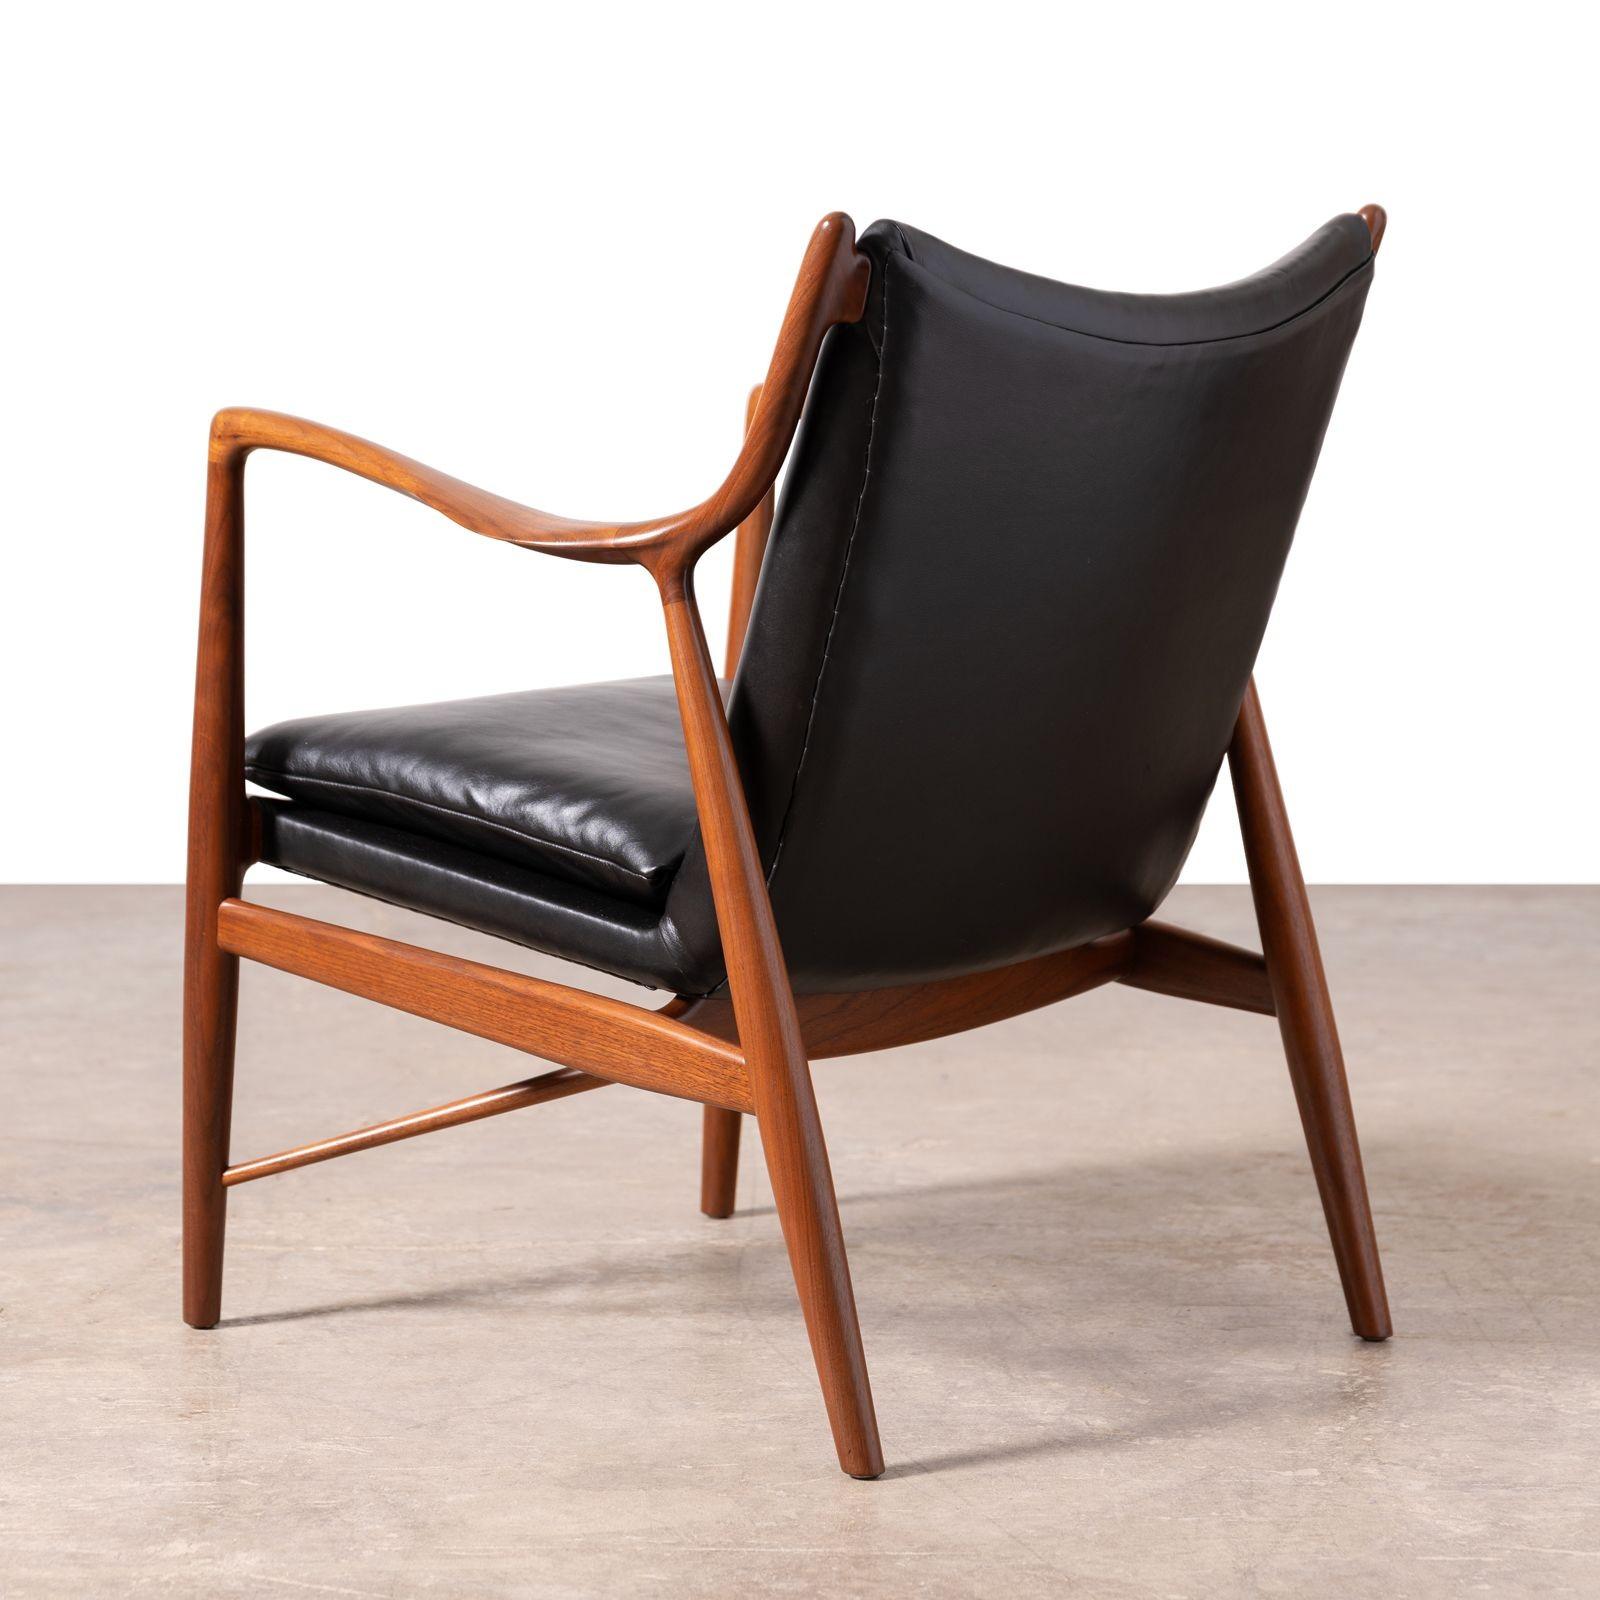 Mid-20th Century Finn Juhl NV-45 Scandinavian Lounge Chairs in Walnut and Black Leather 1950s For Sale